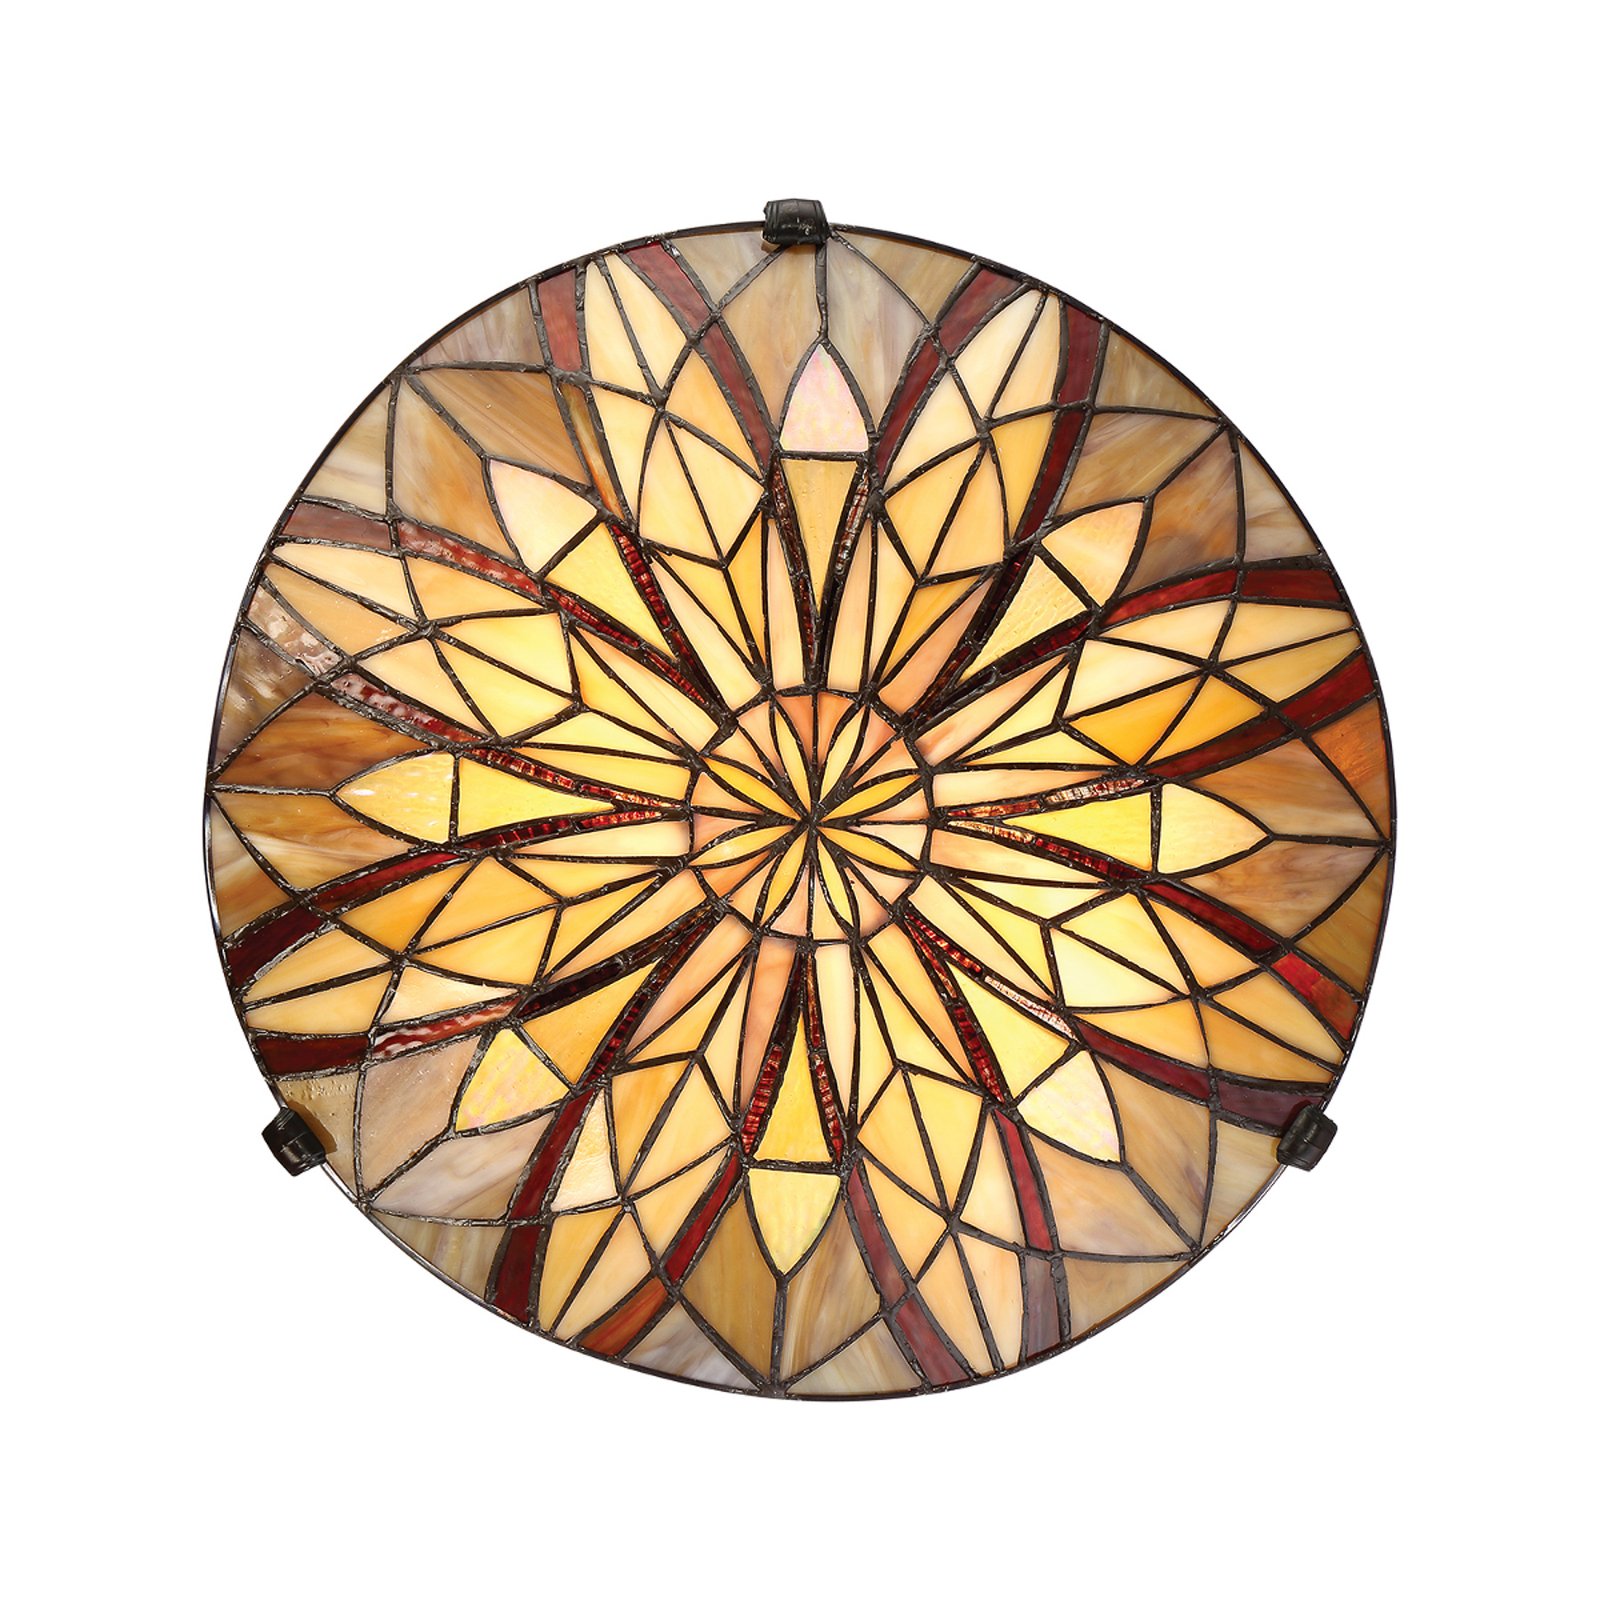 Victory ceiling light, Tiffany-style lampshade